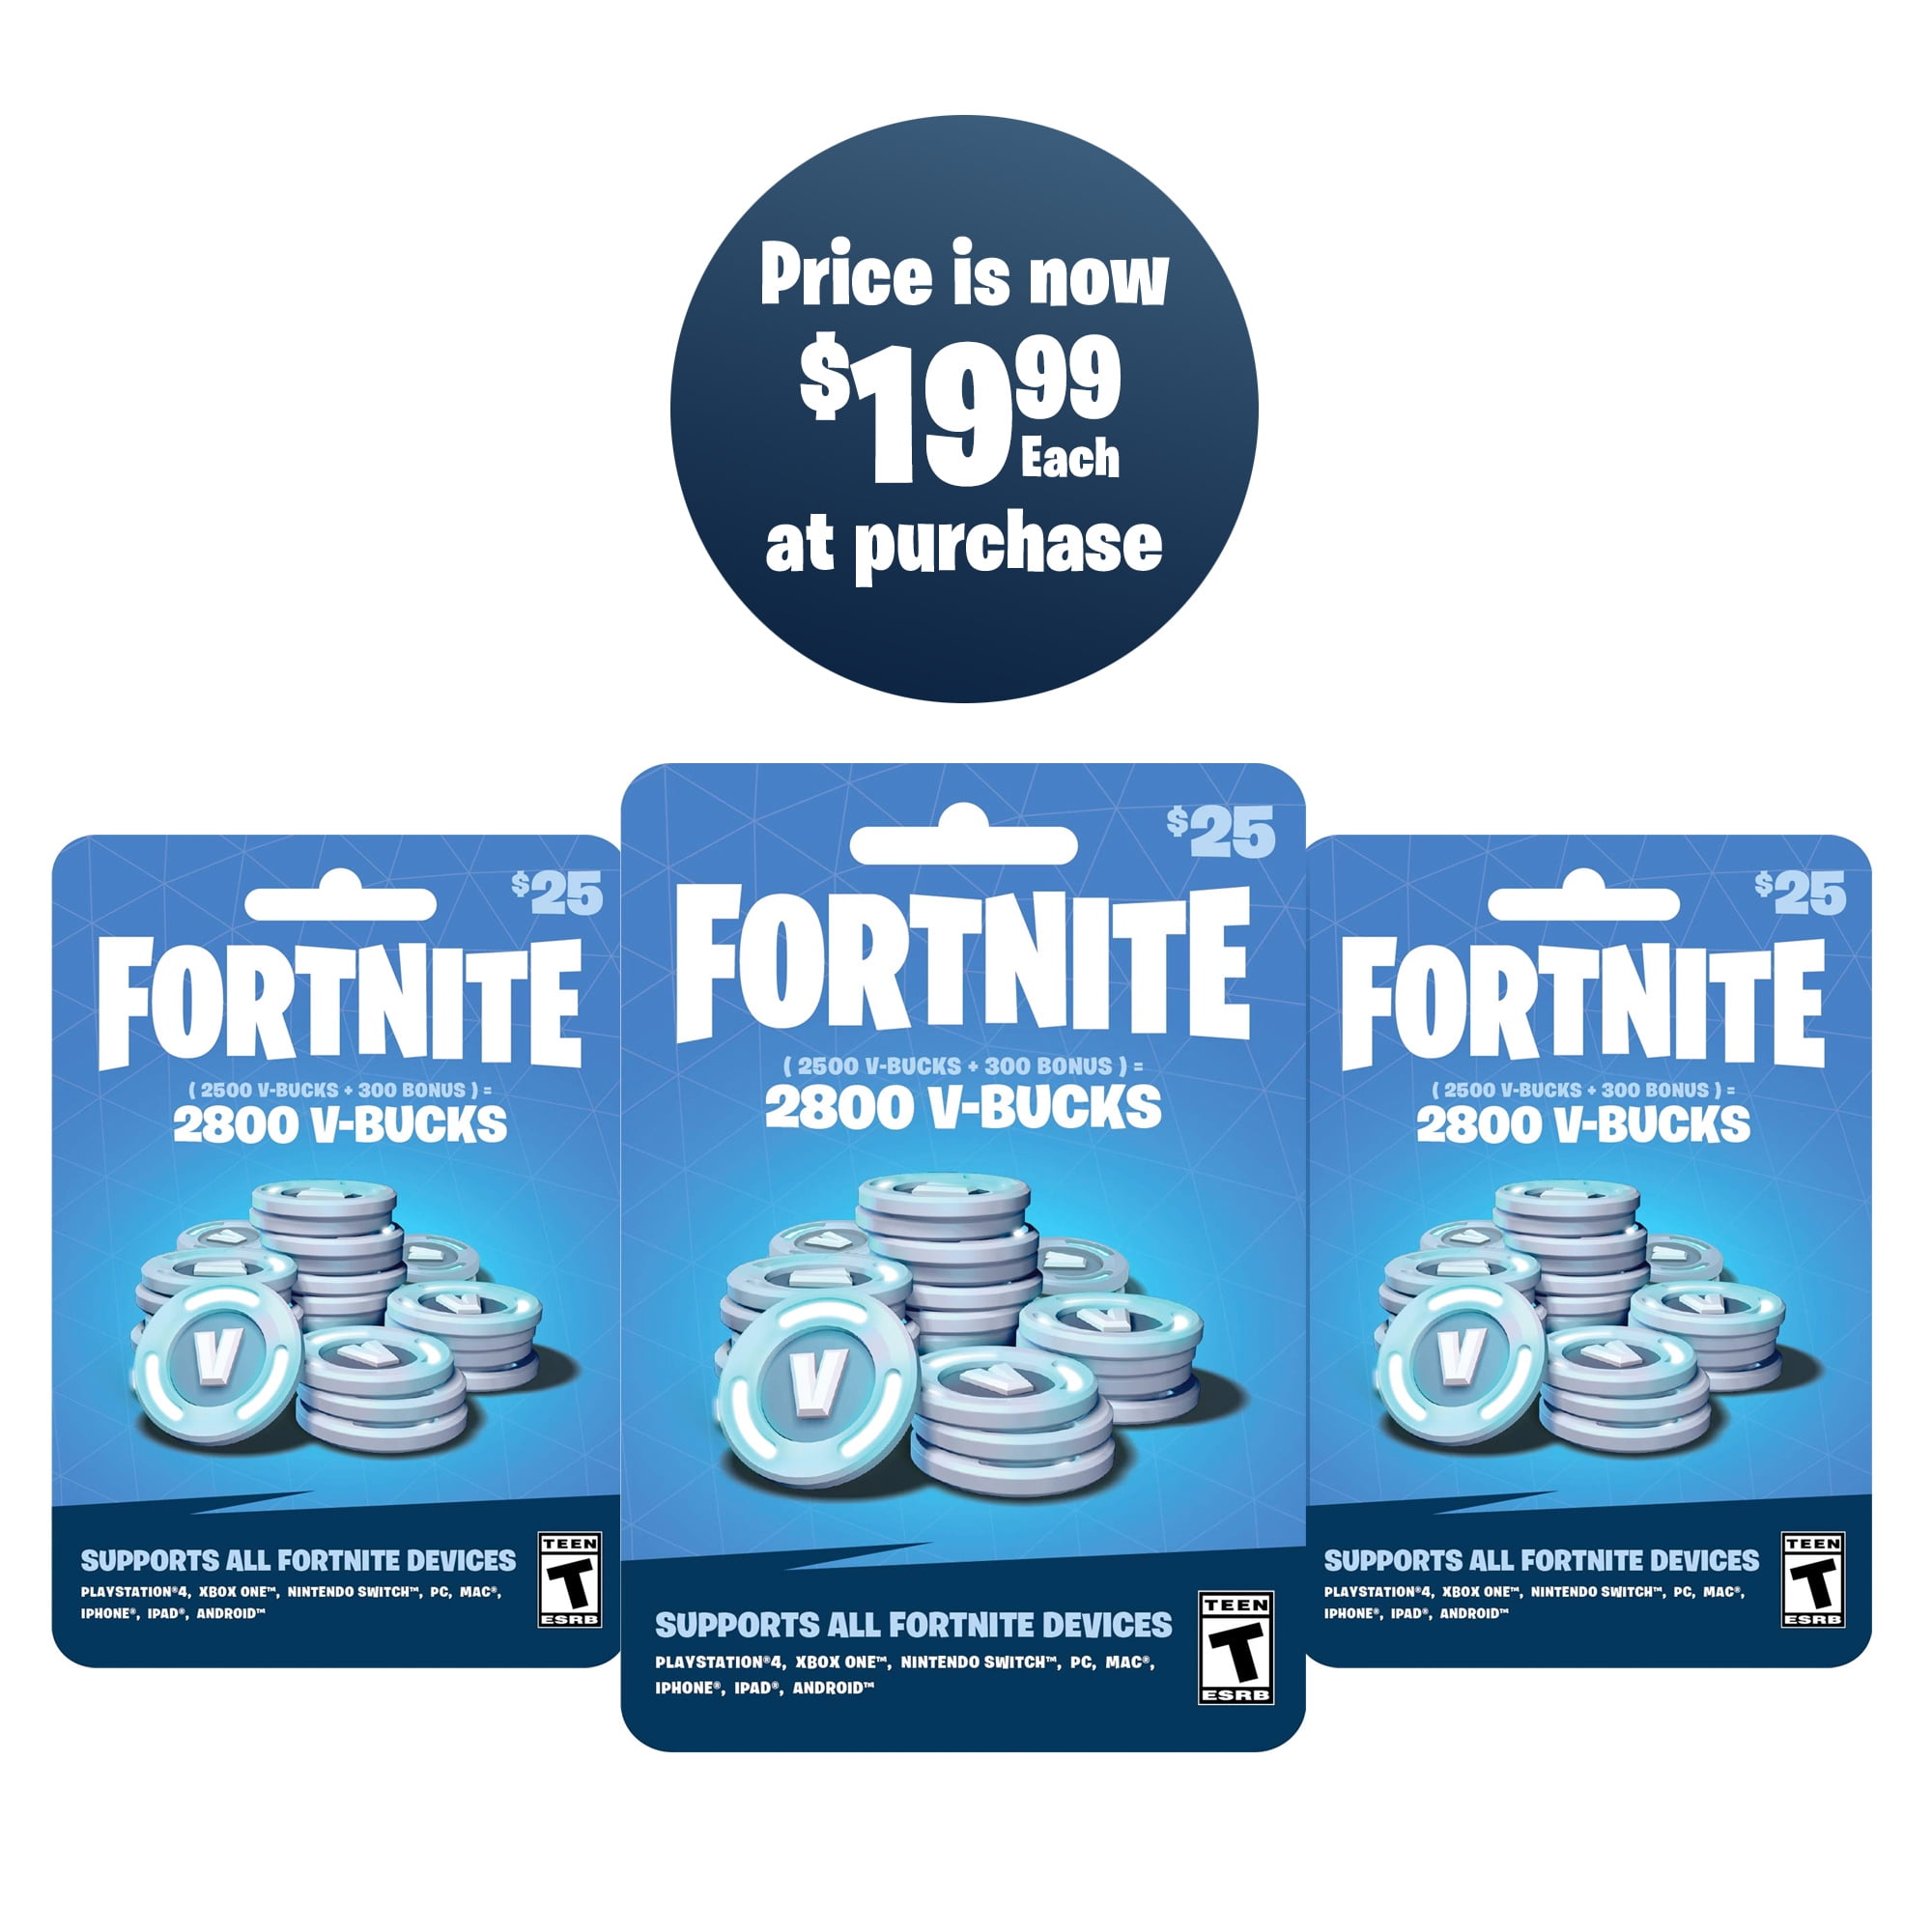 Gift Fortnite V Bucks – How to Give Friends Currency